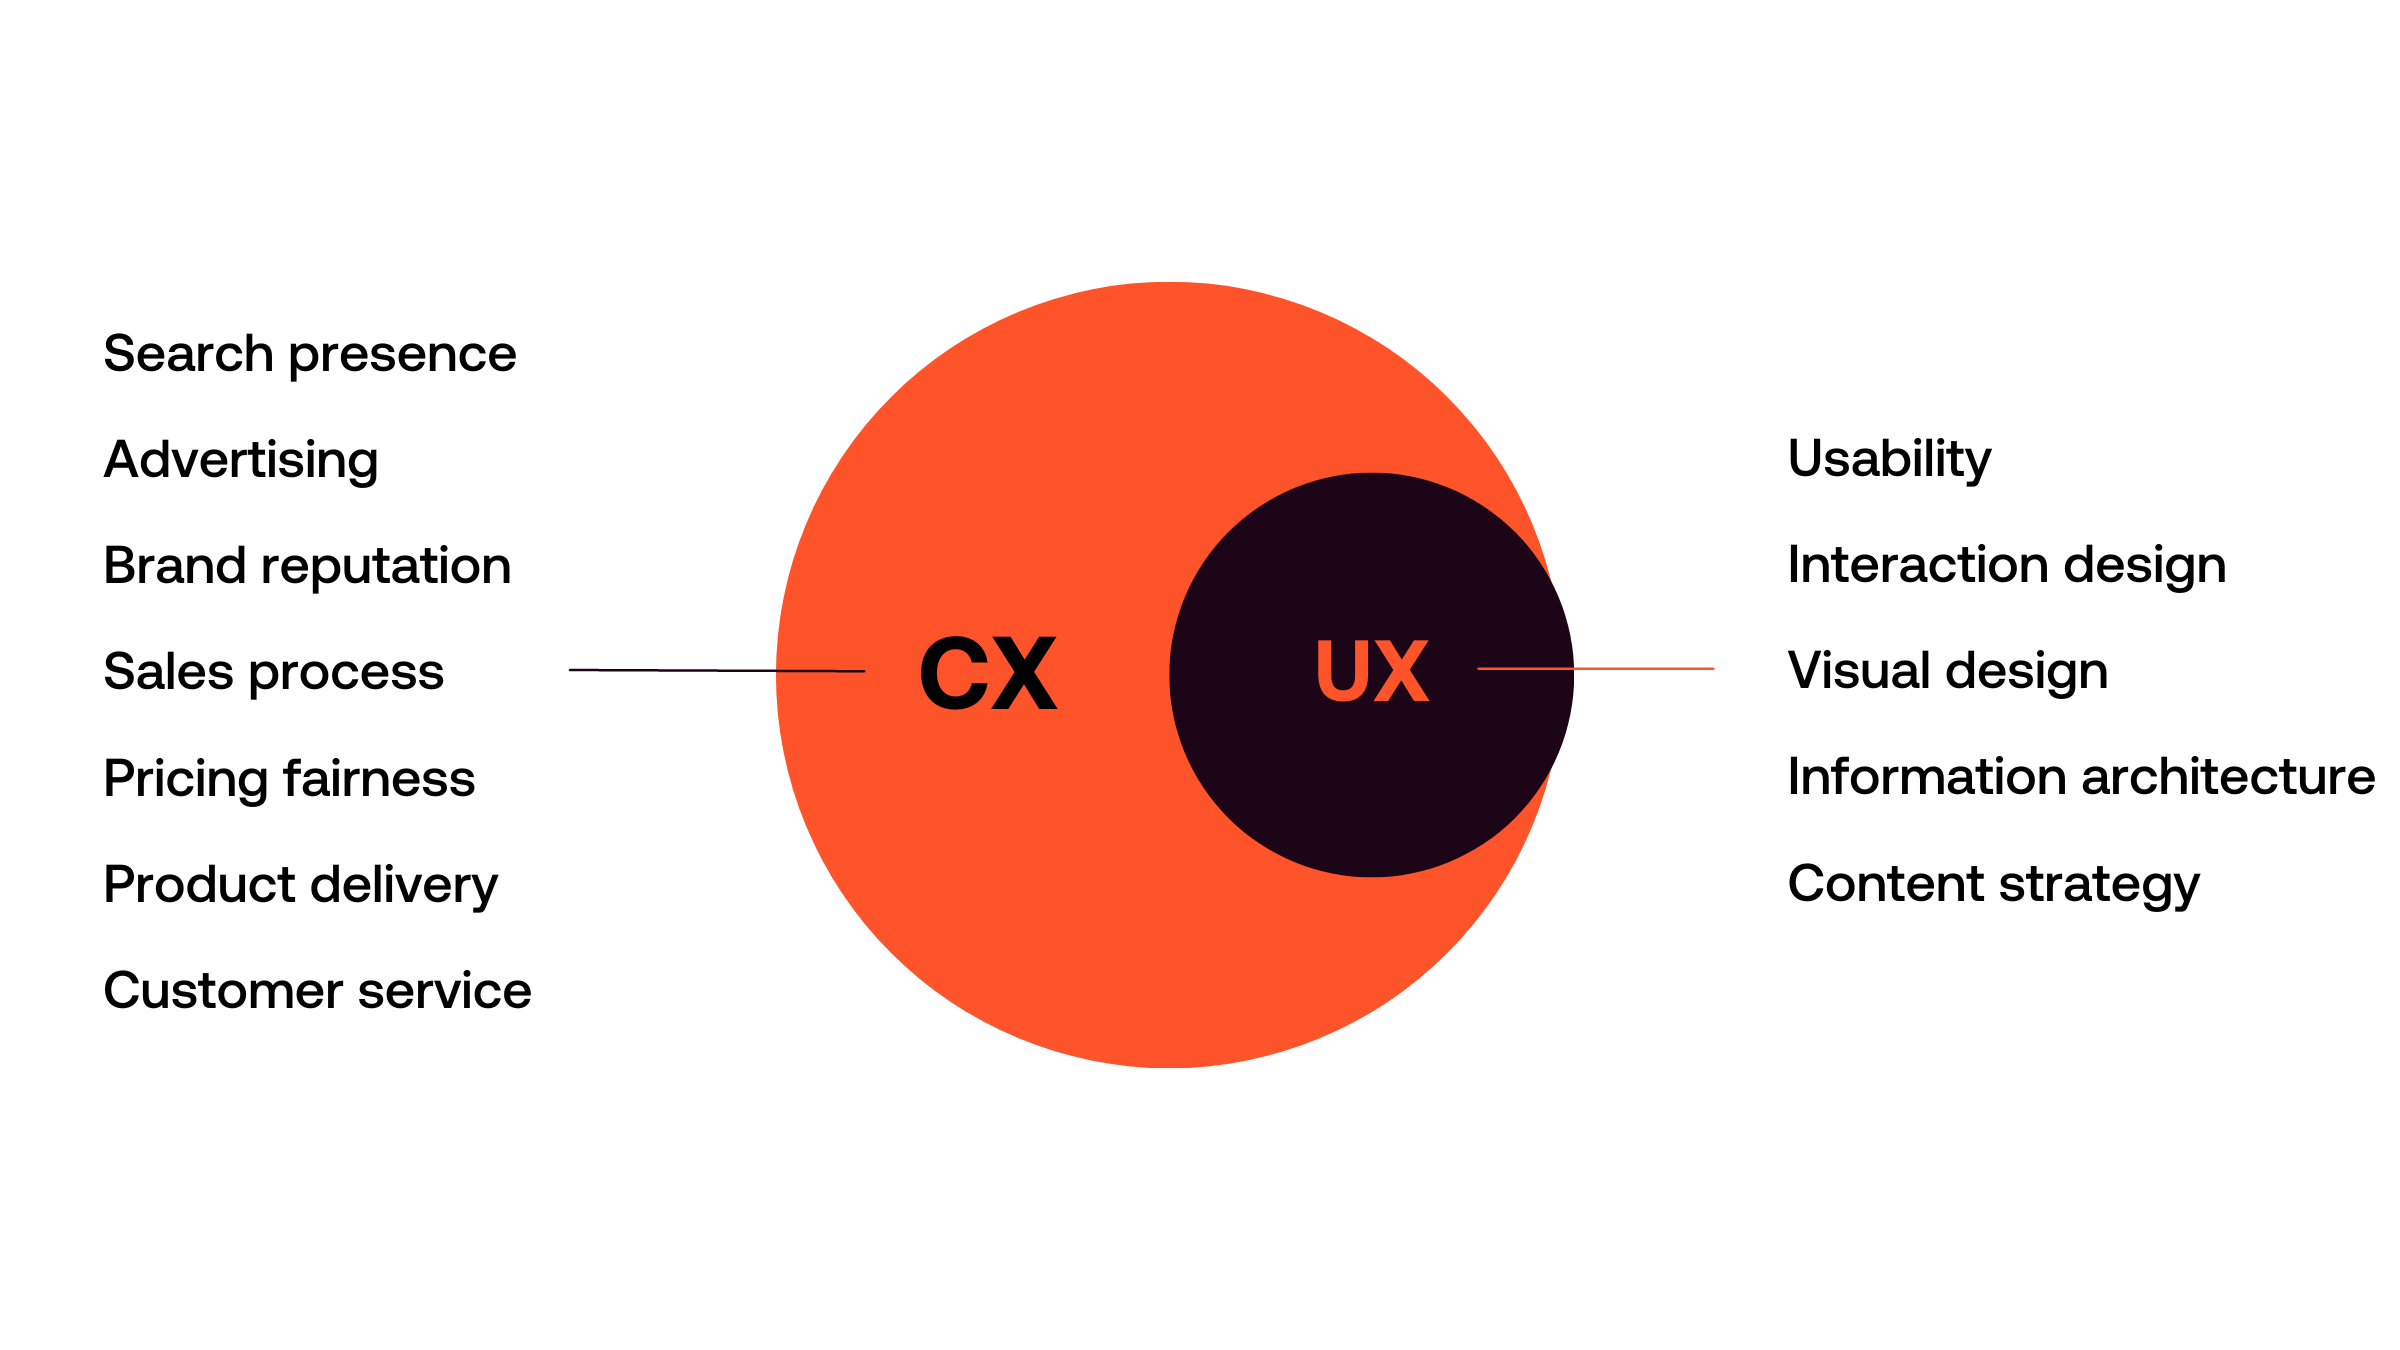 CX and UX